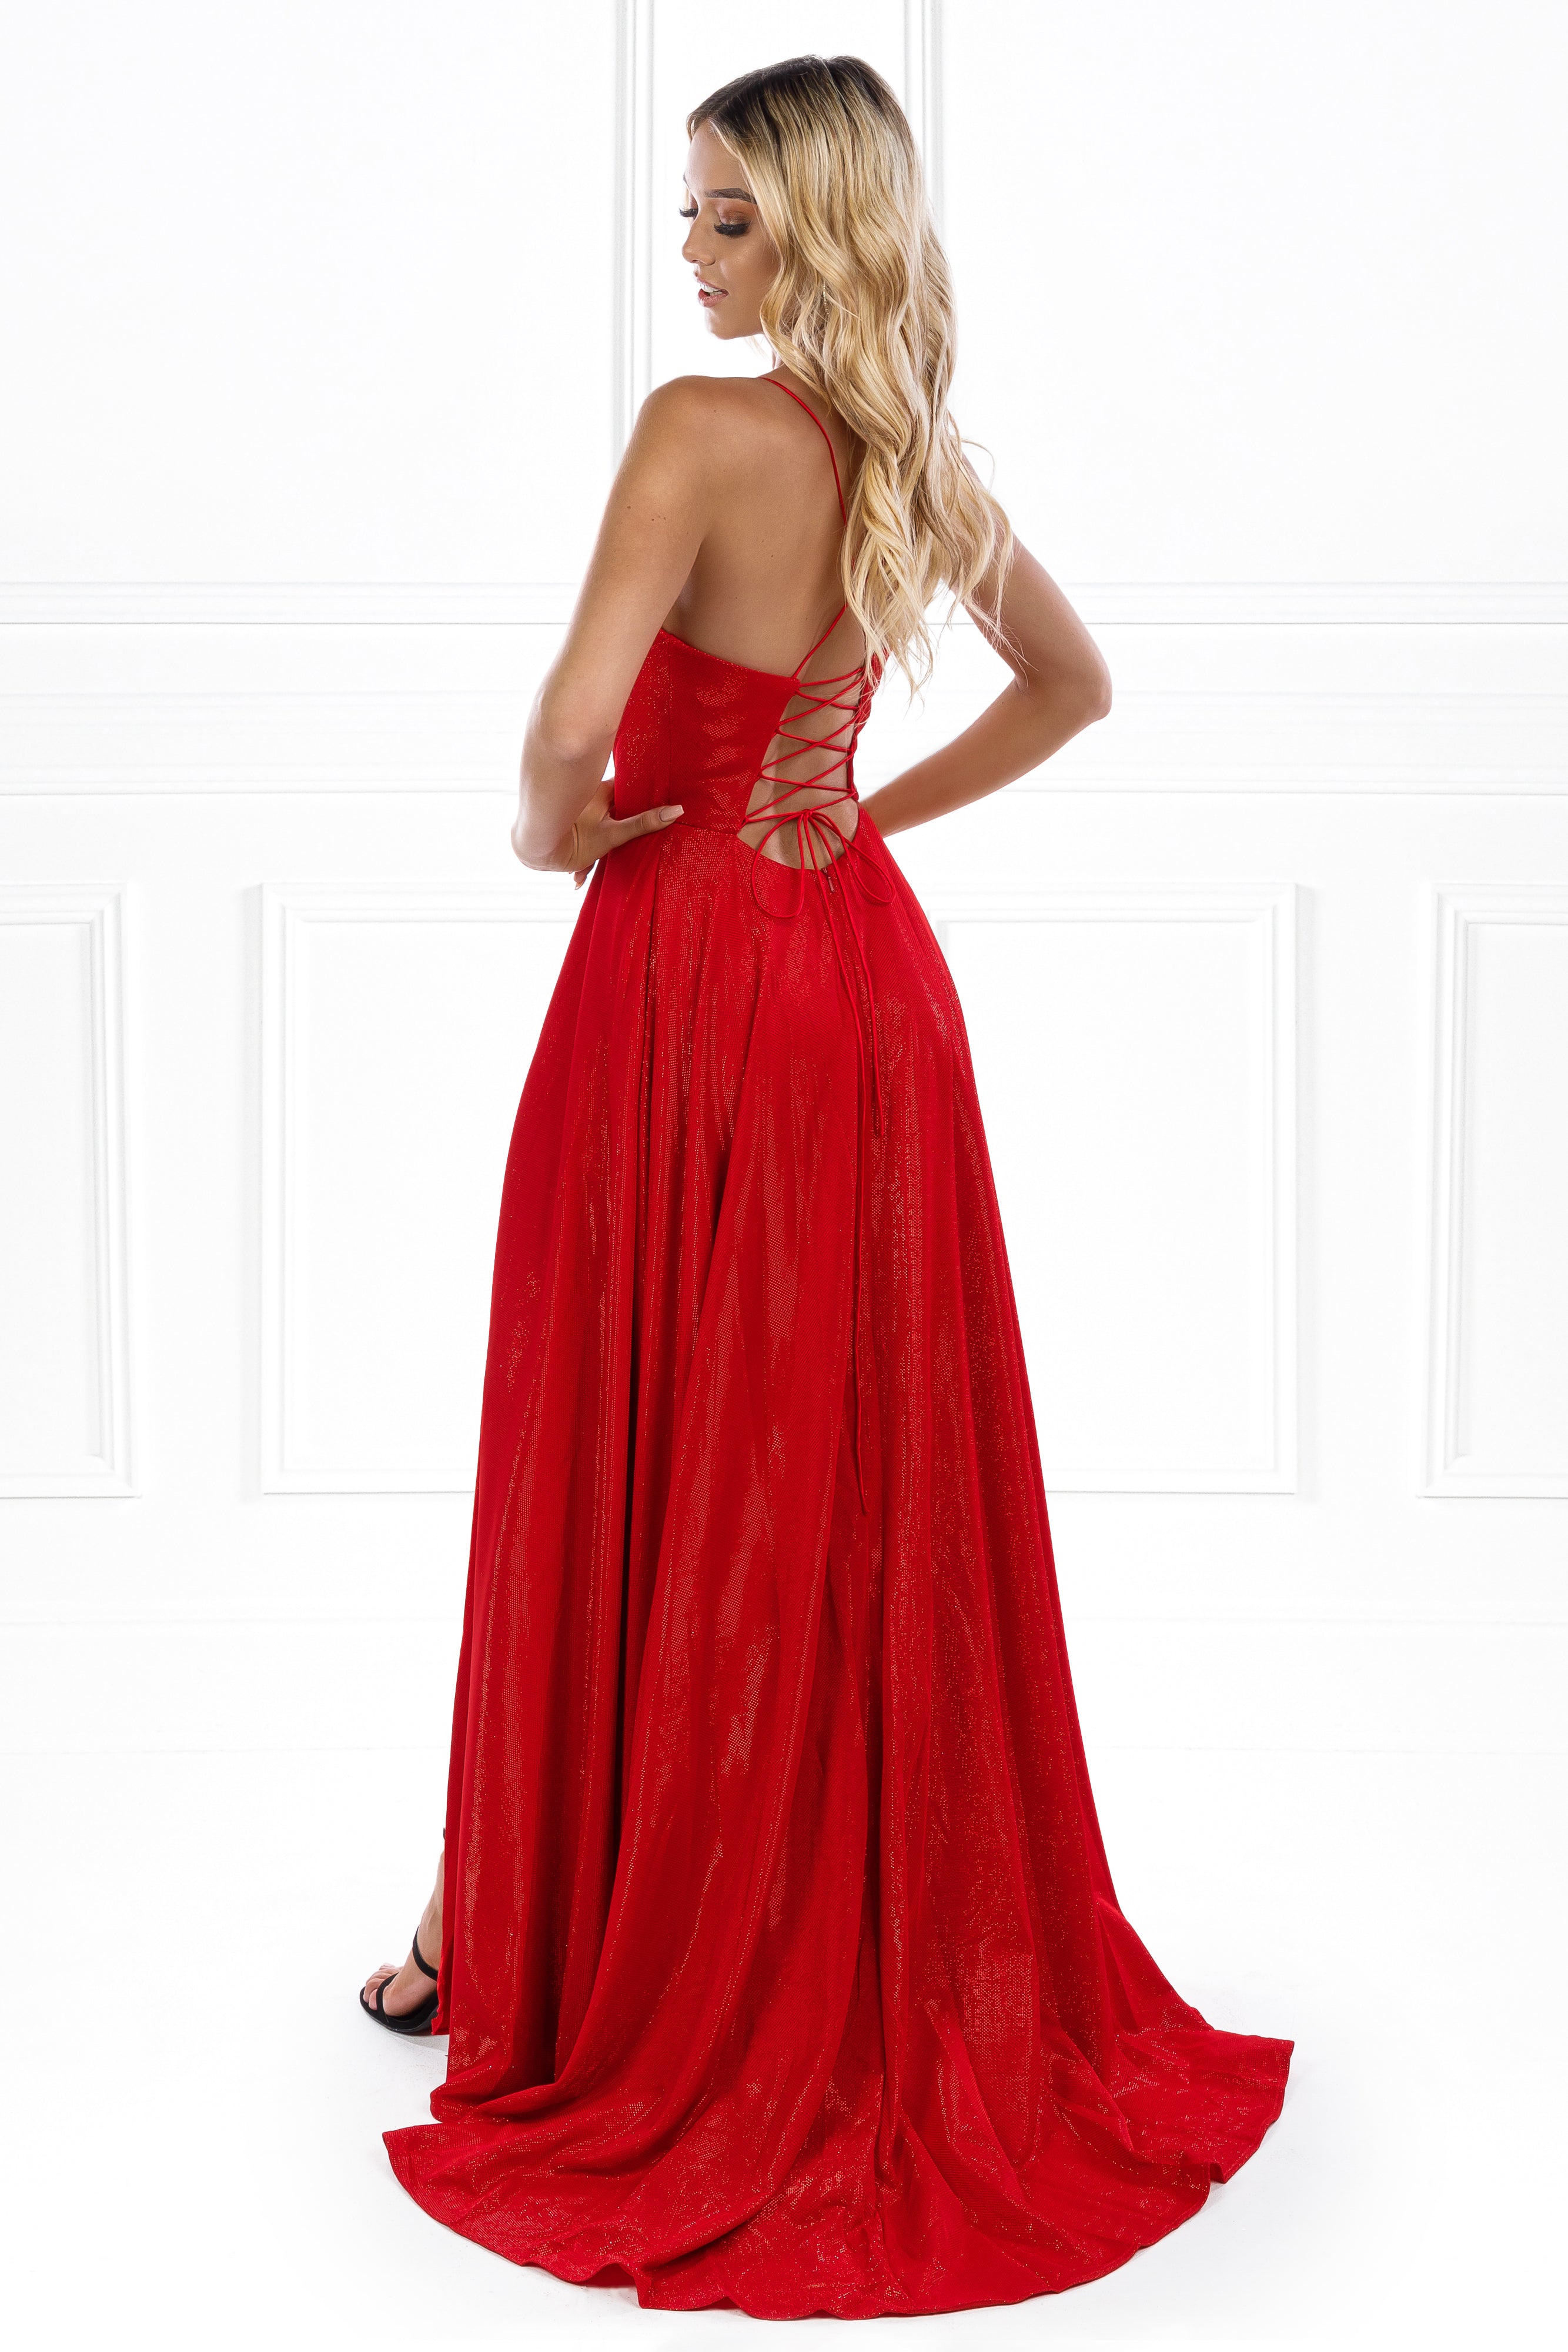 Honey Couture KYLA Red Shimmer Lace Up Back Formal Gown Dress